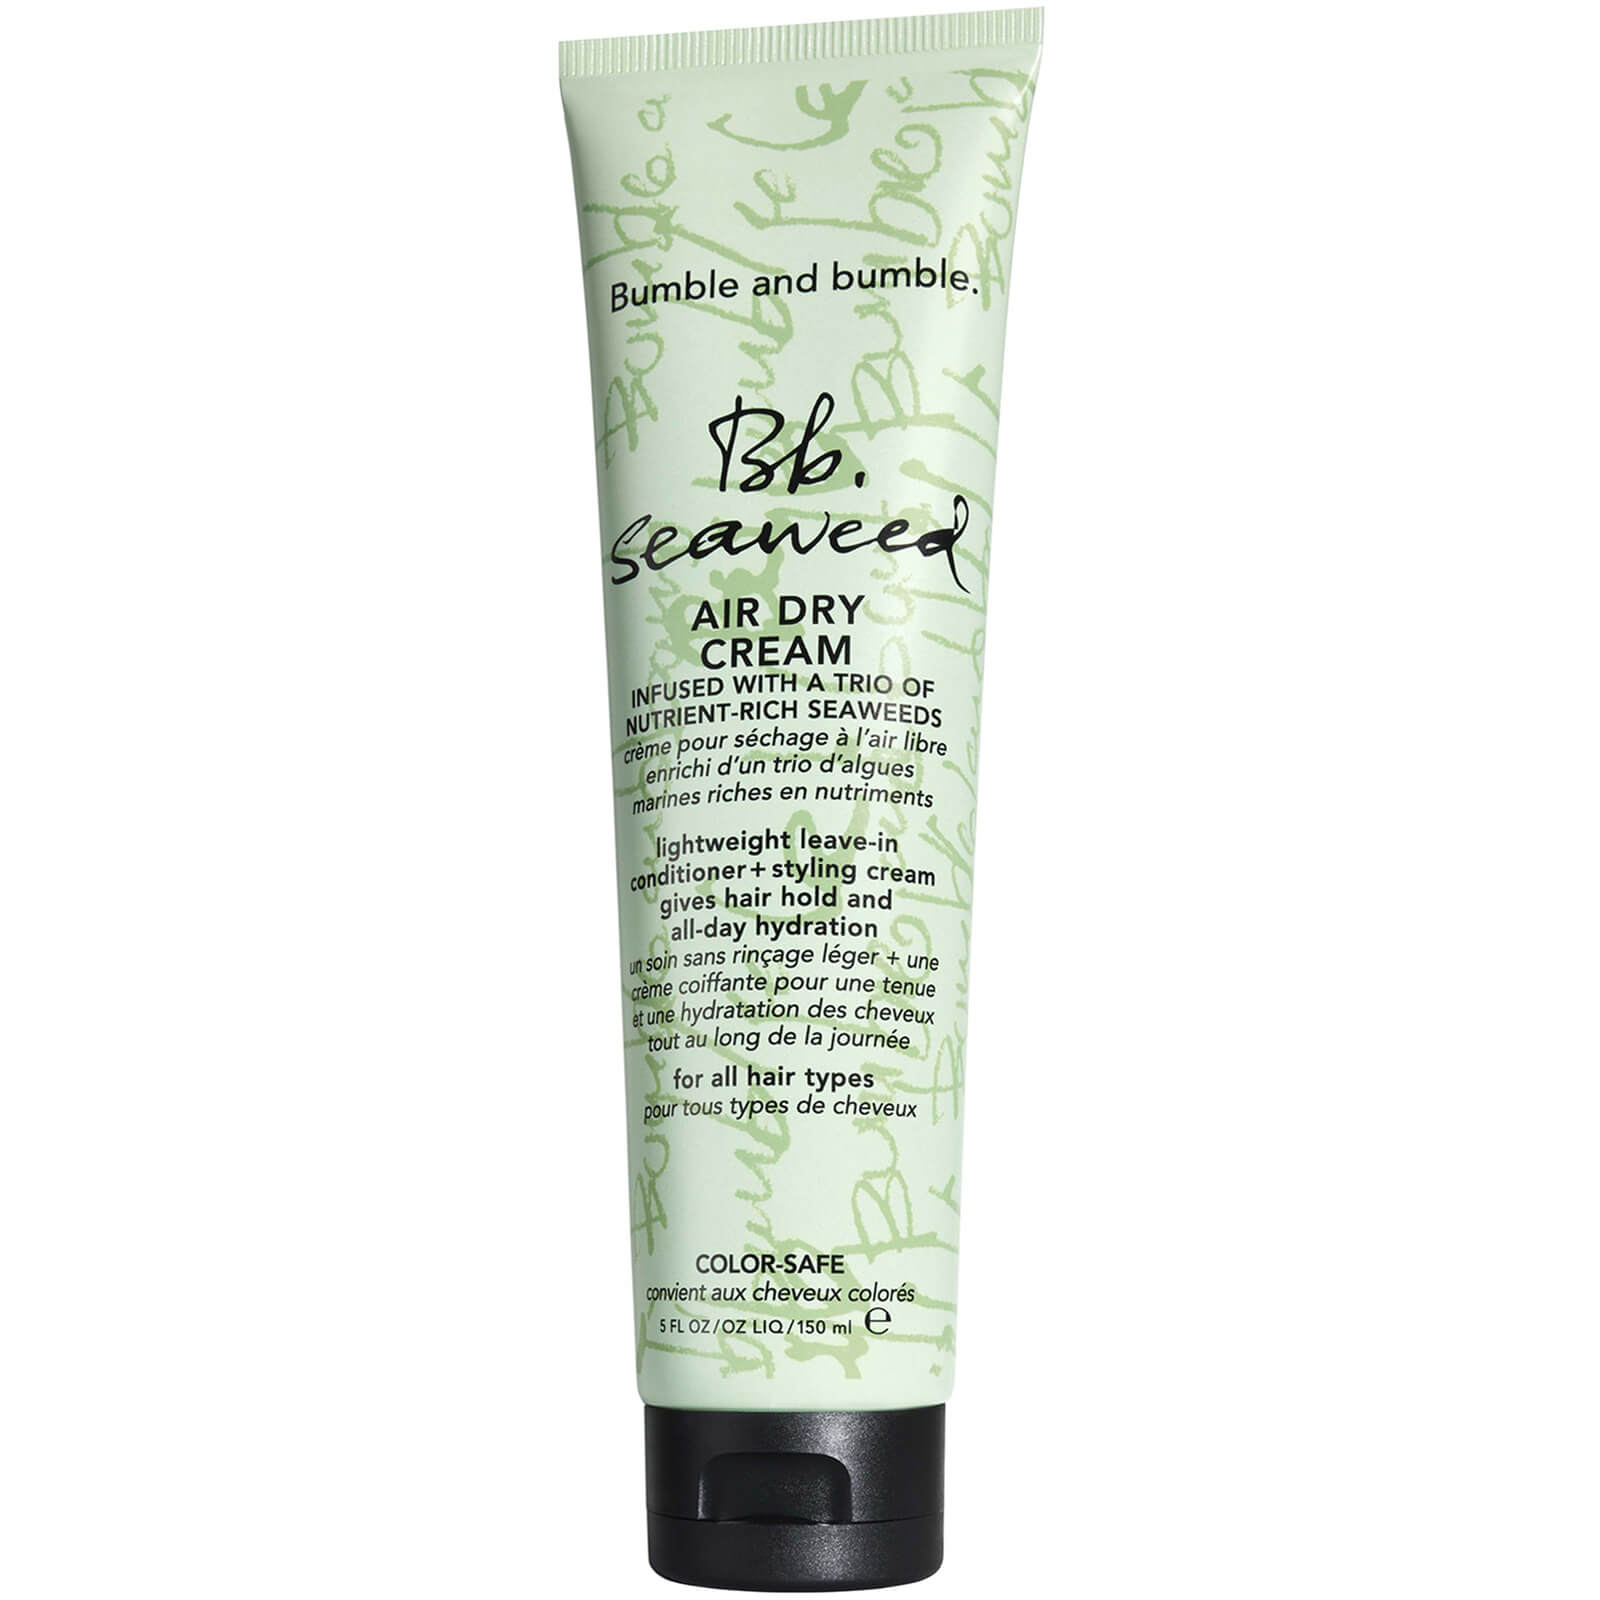 Bumble and bumble Seaweed Air Dry Leave-in Conditioner 150ml